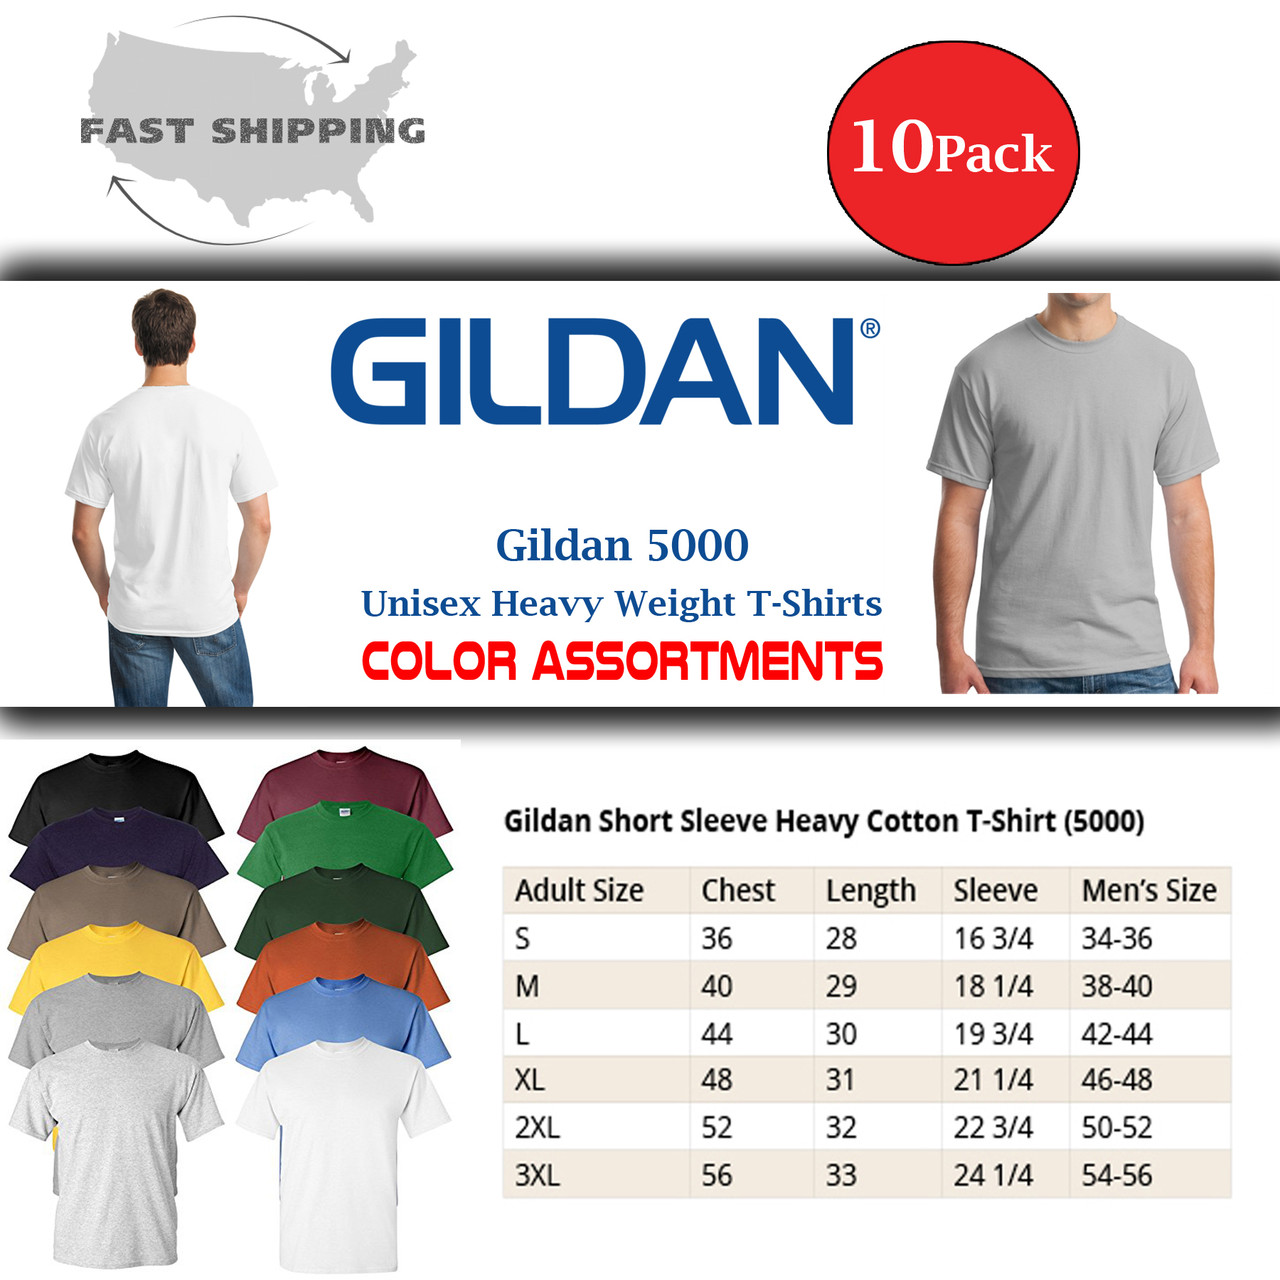 Gildan Sport Grey T-Shirts For Wholesale Prices